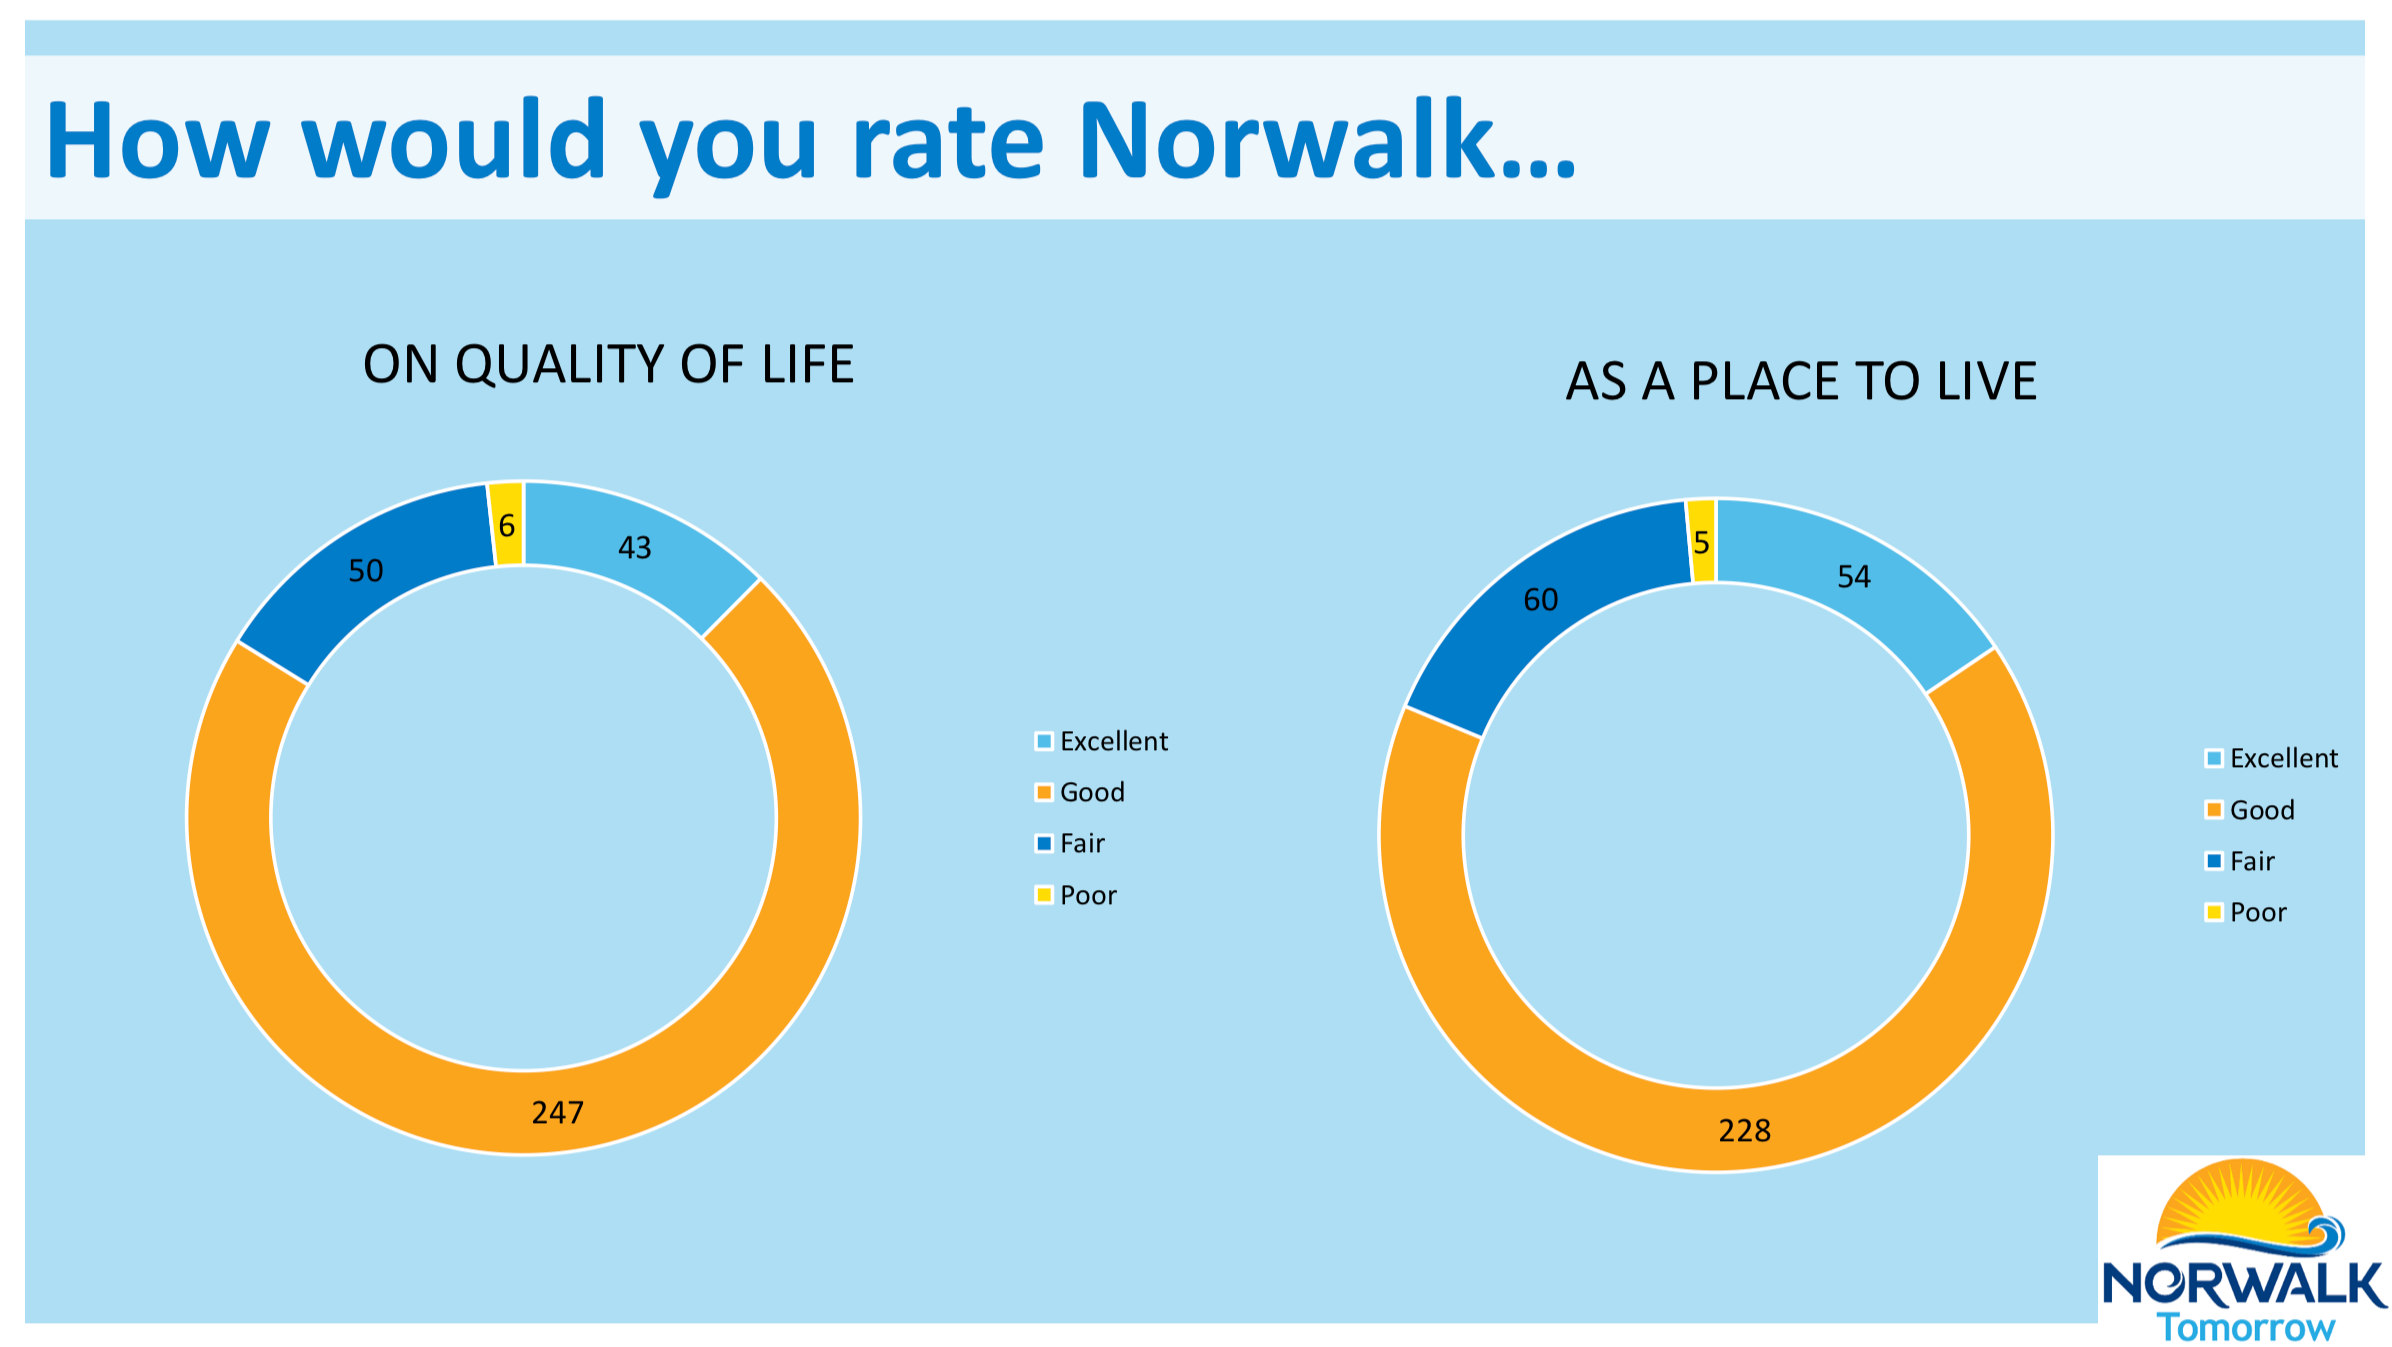 Pie charts results of "how you rate Norwalk" quality of life and as place to live